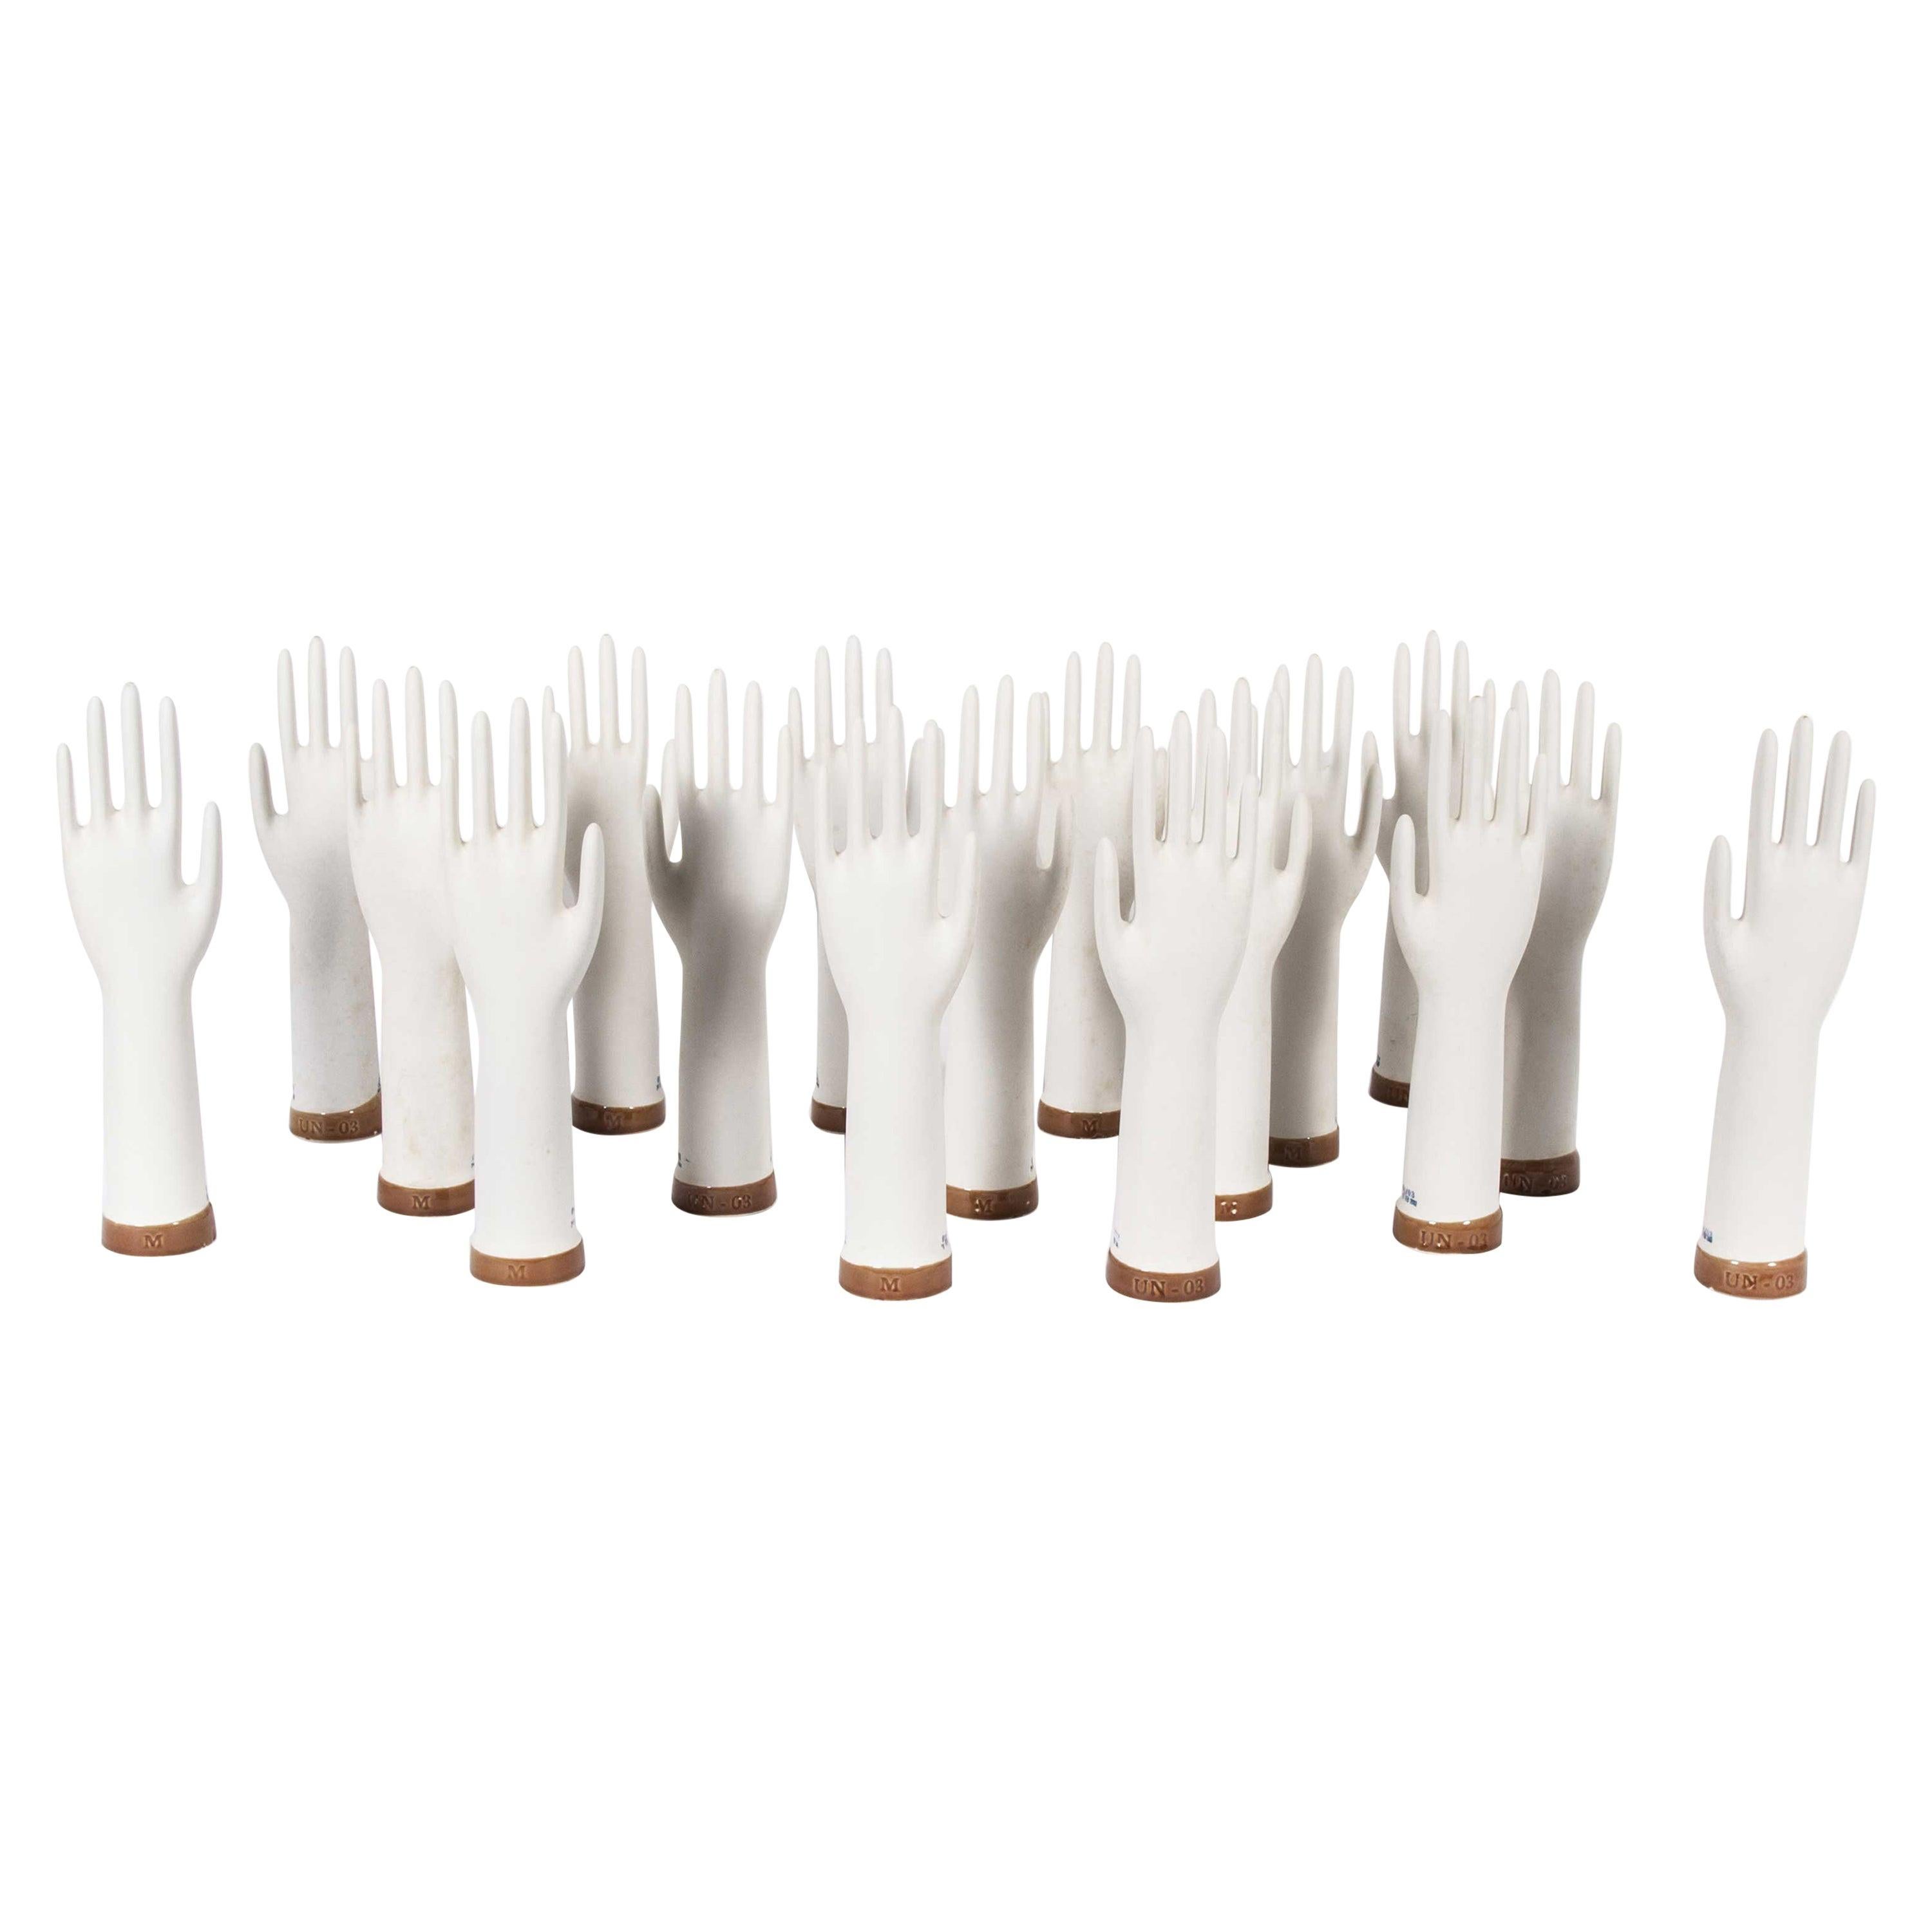 1960s Ceramic Rubber Glove Hand Moulds, Singles 'Red Base'